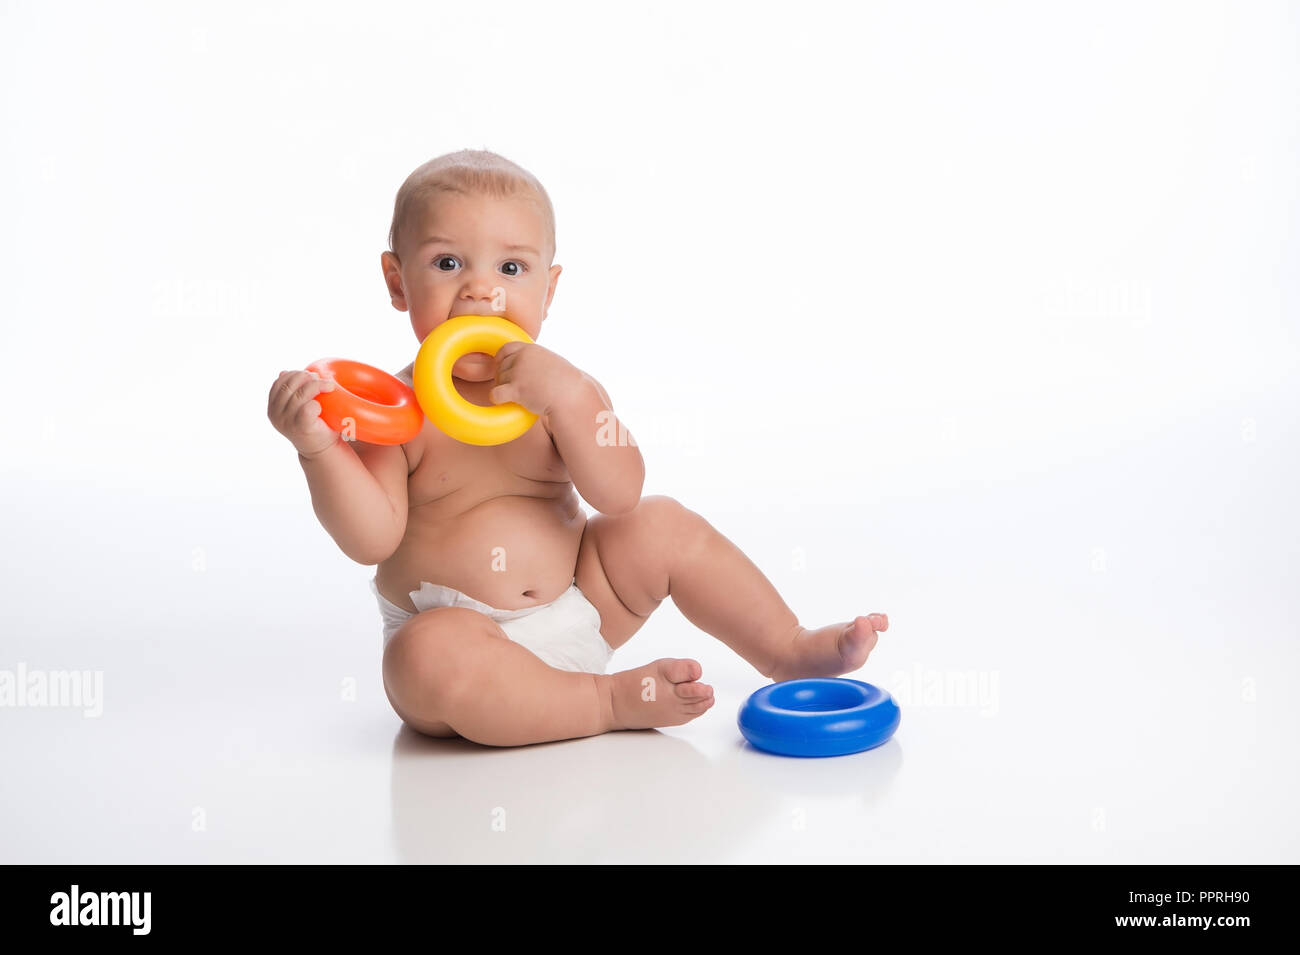 A seven month old baby boy, with a cute expression, putting a toy ring in his mouth. Shot in the studio on a white, seamless backdrop. Stock Photo